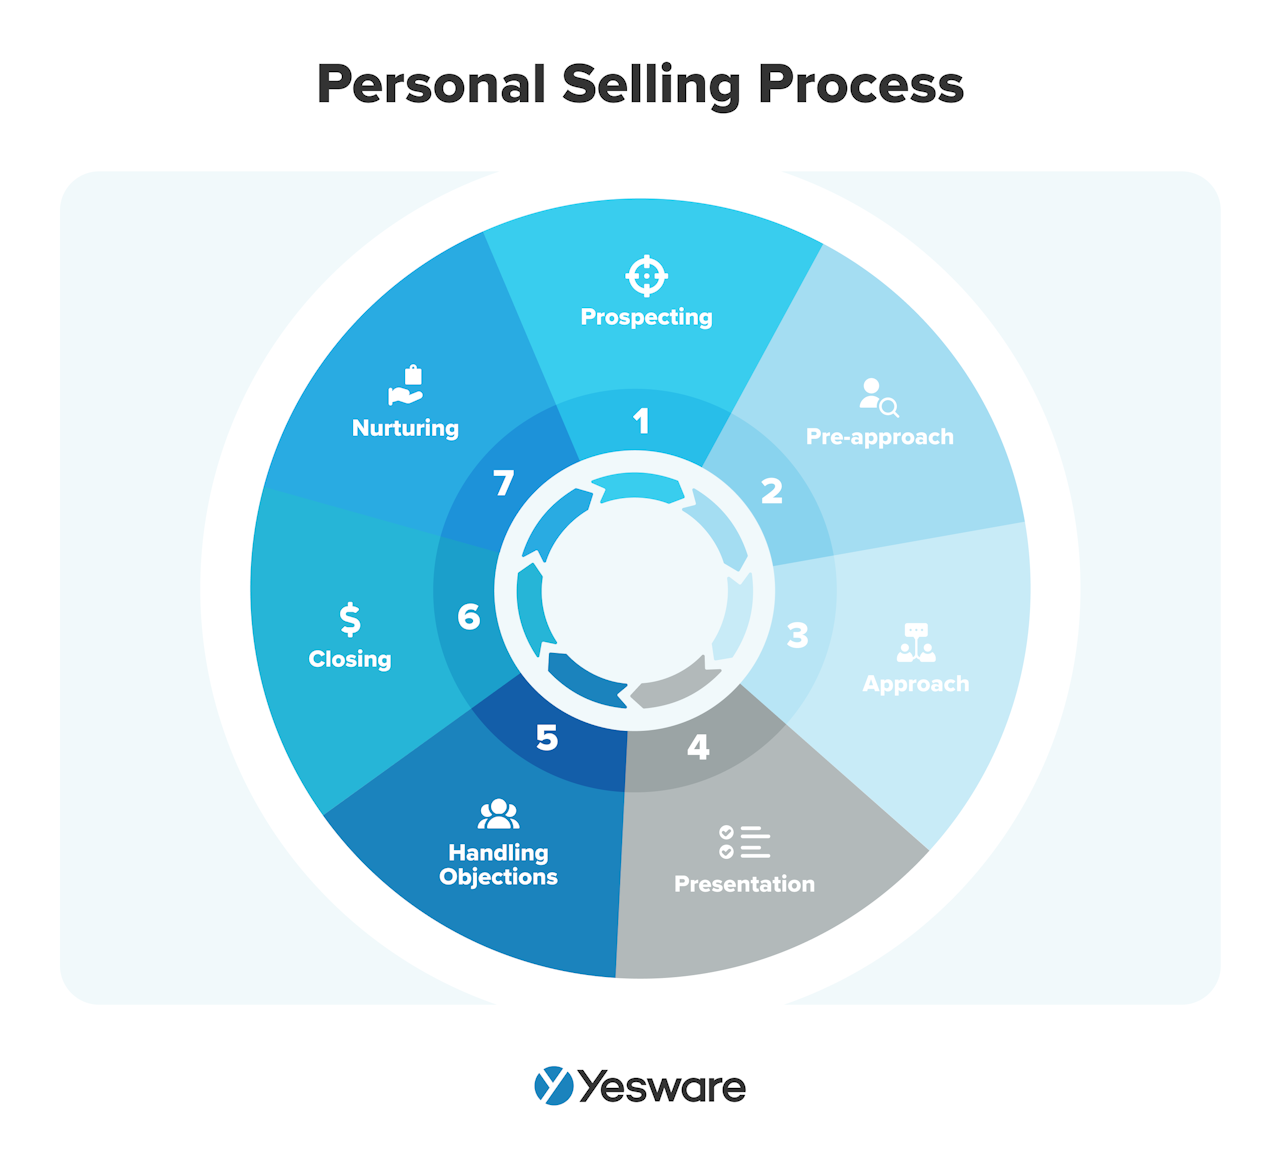 Personal selling process